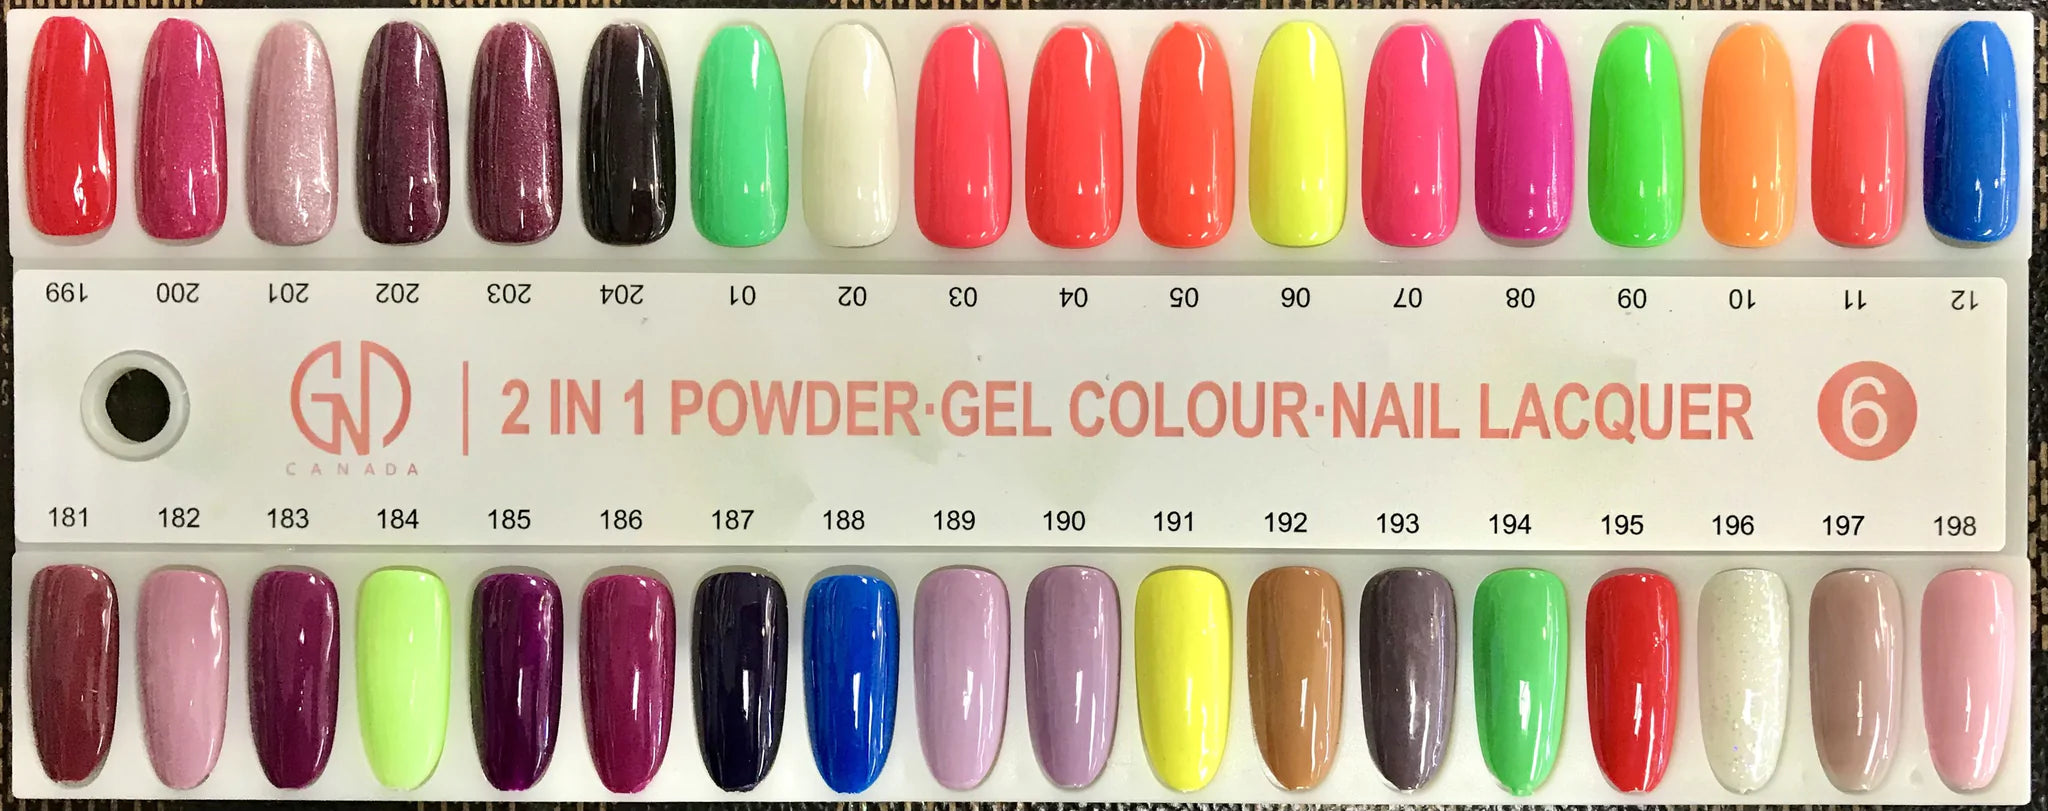 GND Duo Gel & Lacquer 204